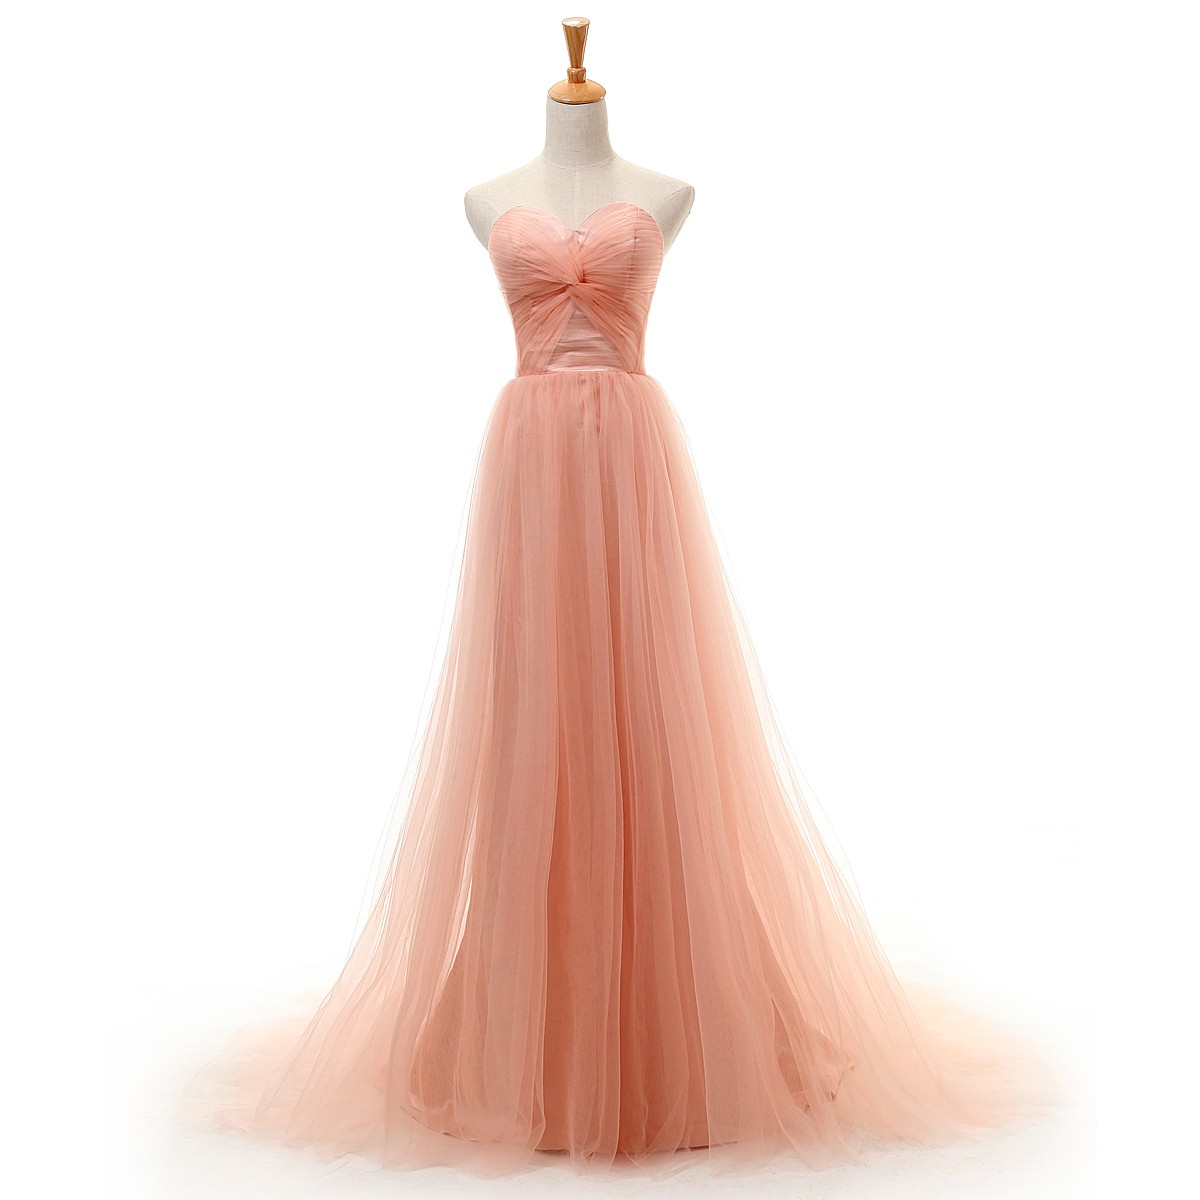 Sexy Sweetheart Low Back Bridesmaid Dresses A Line Pleat Long Tulle Peach Wedding Party Dress Women Formal Prom Dress Gowns